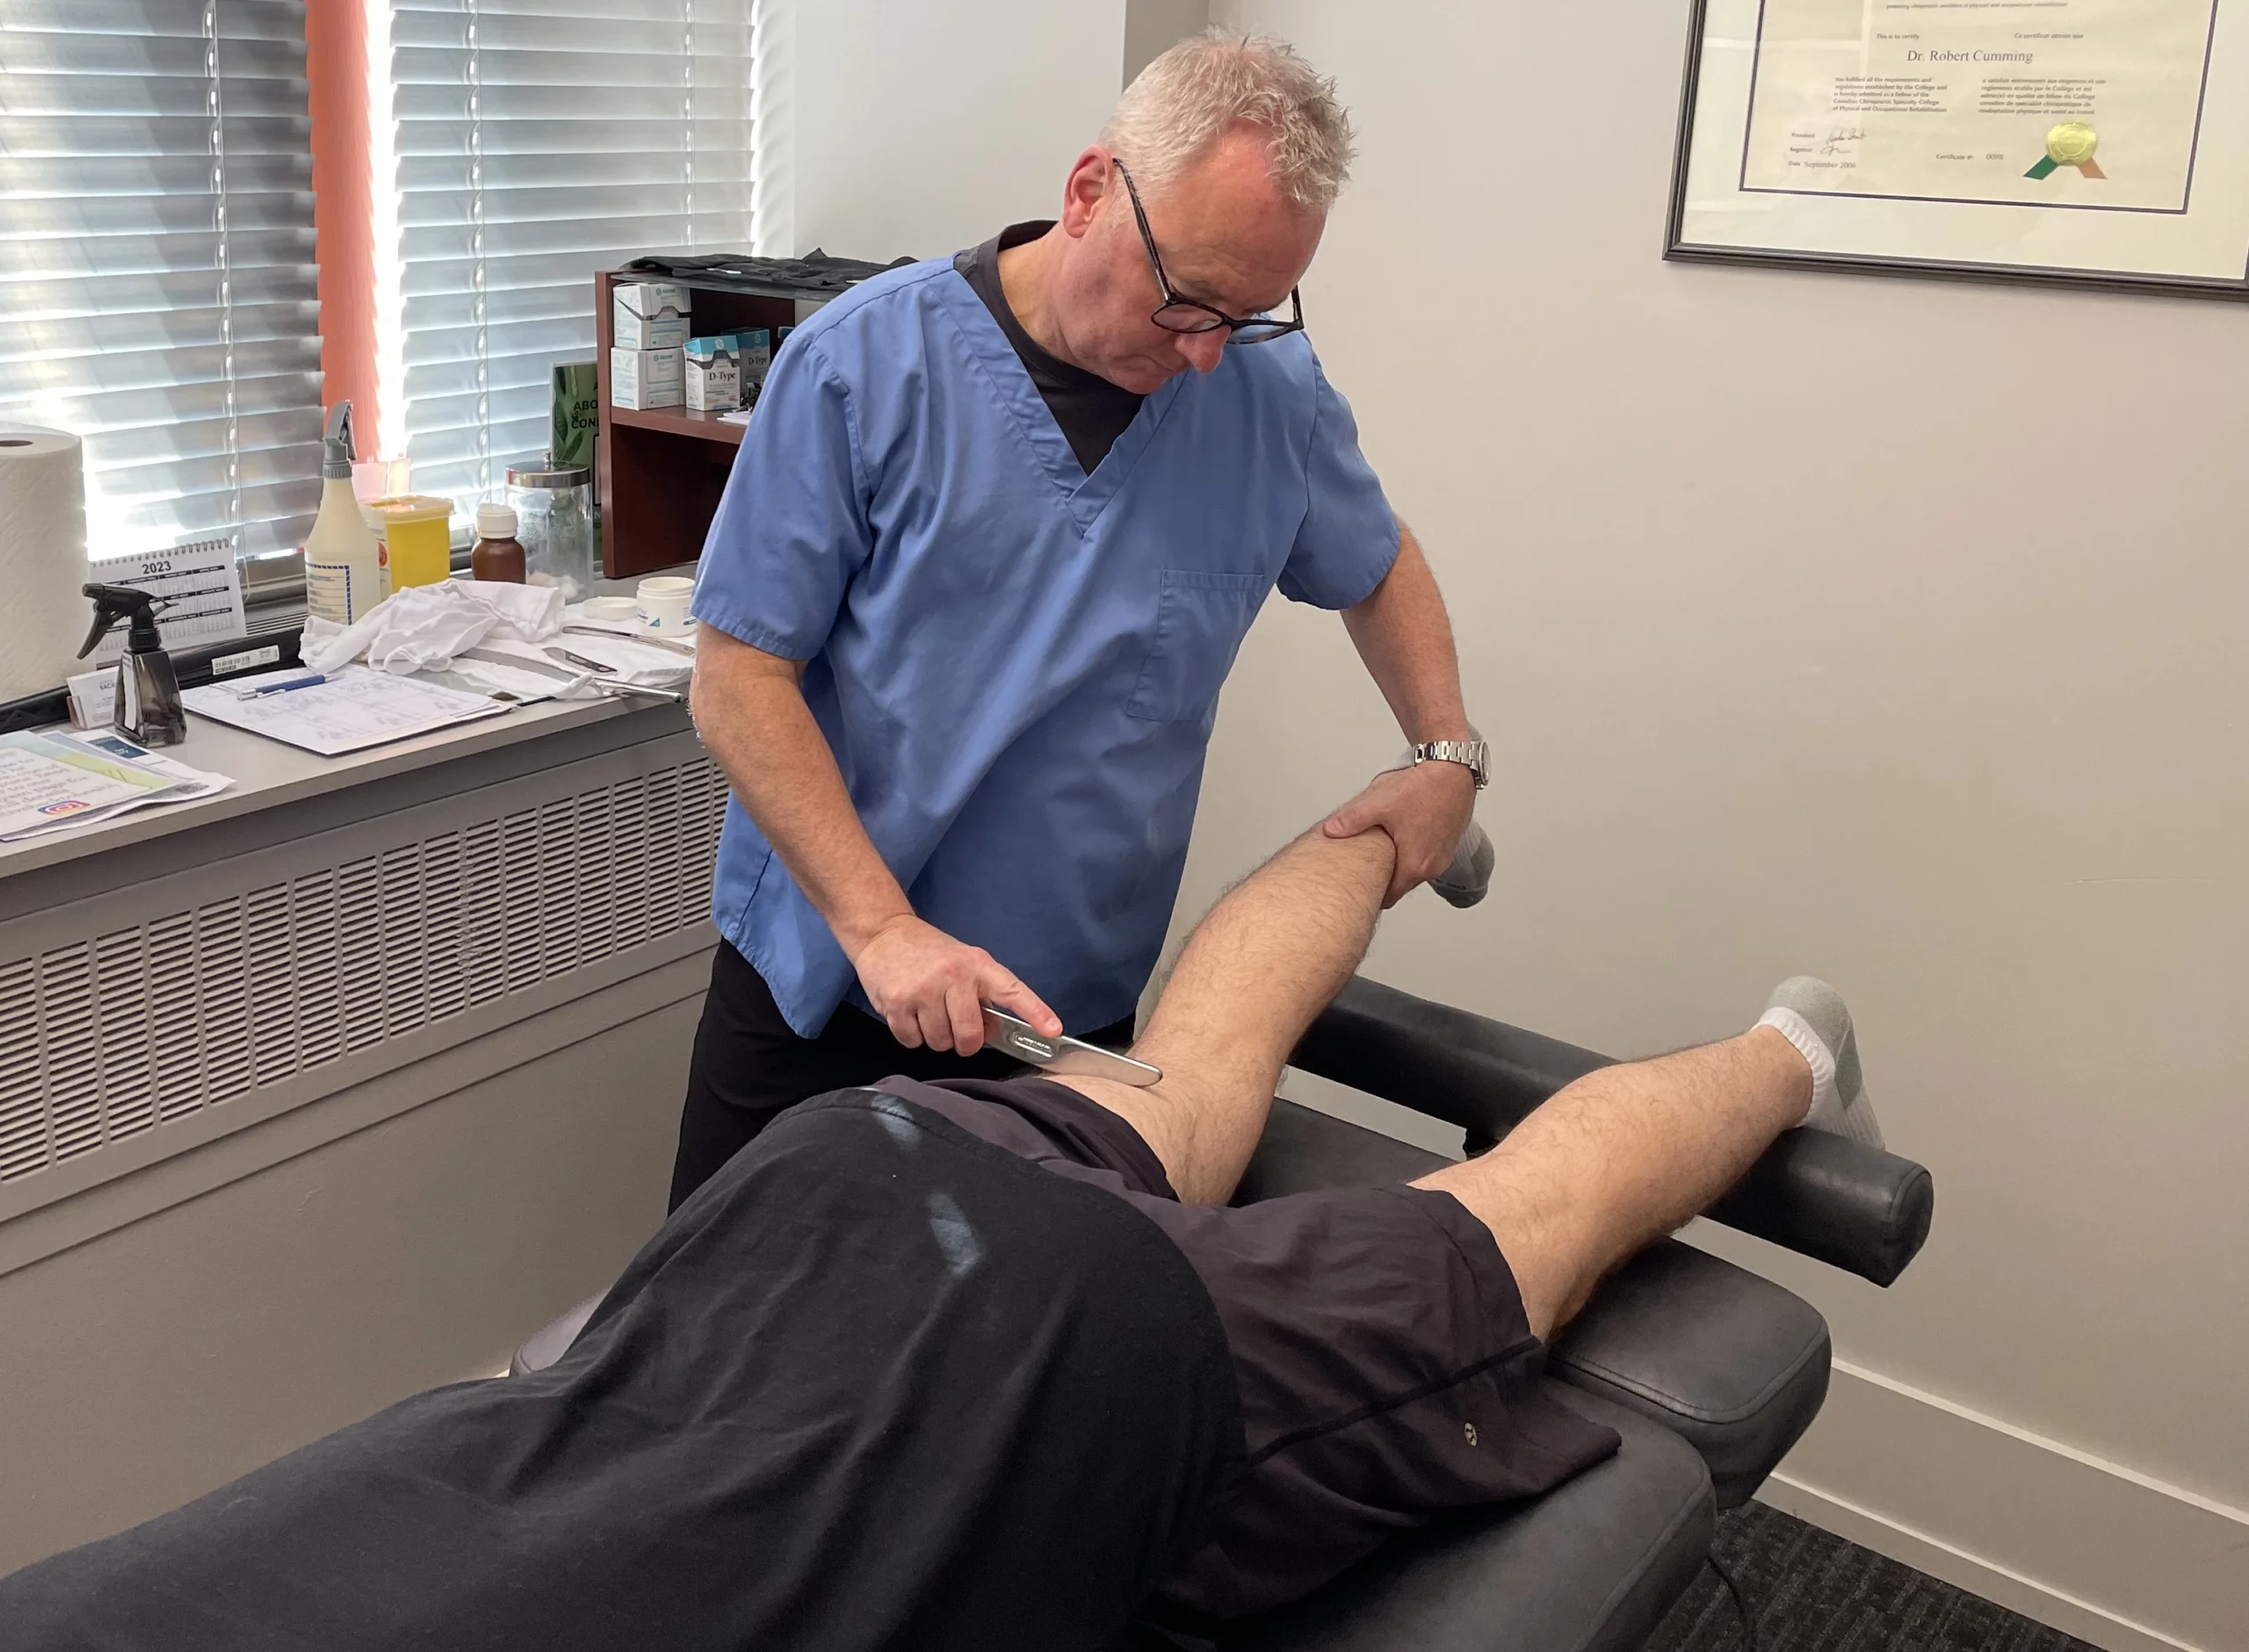 A New Patient is getting his leg massaged in a chiropractor office.